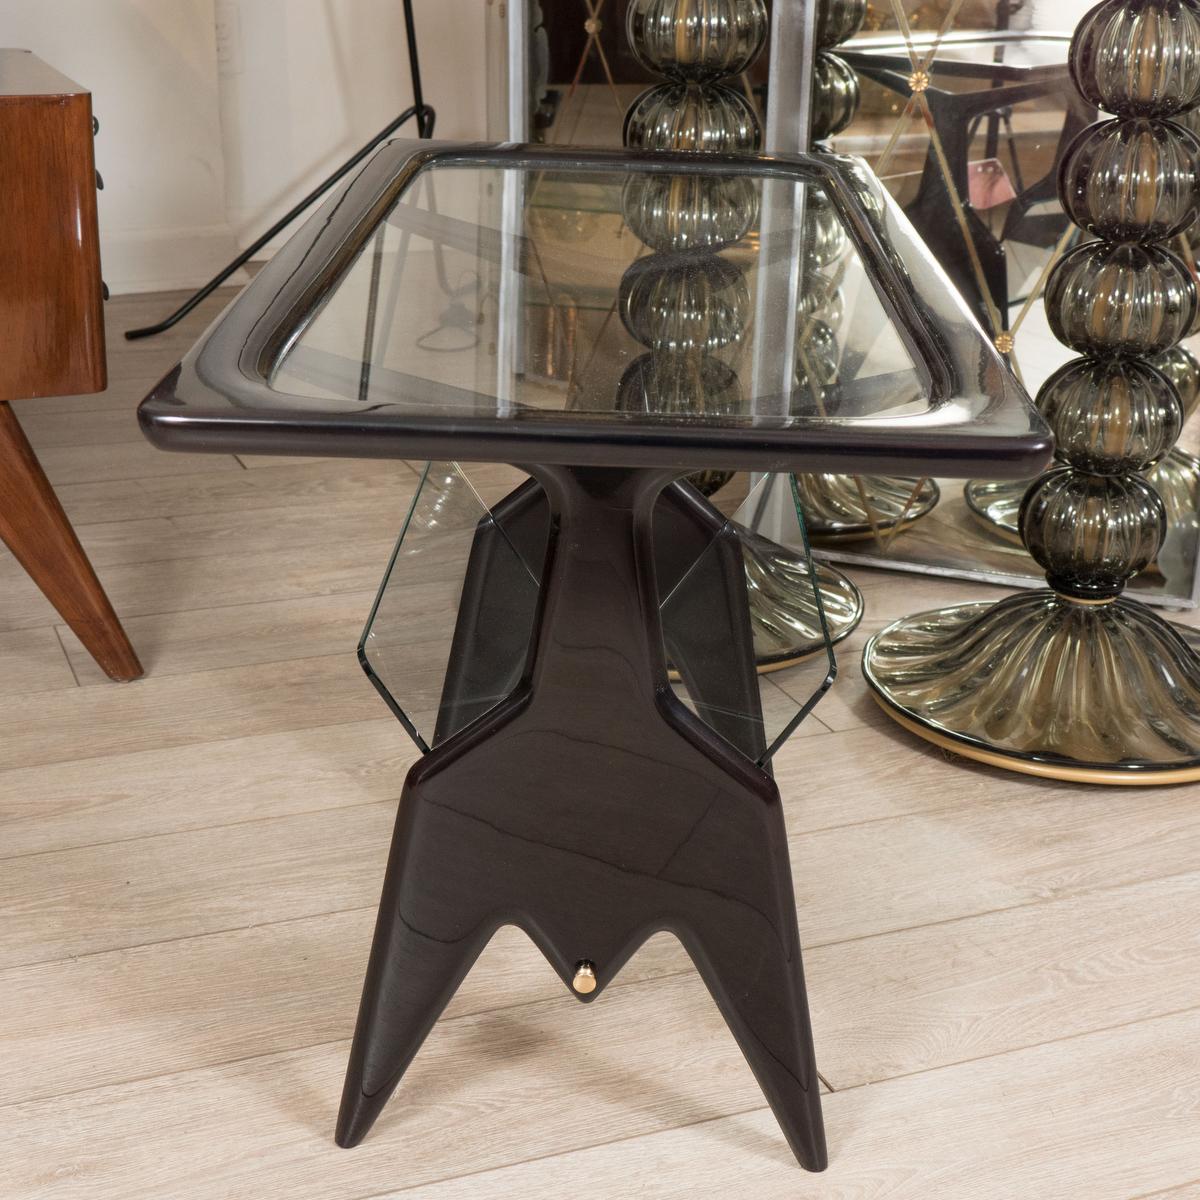 Italian Ebonized Wood Table with Glass Inserts For Sale